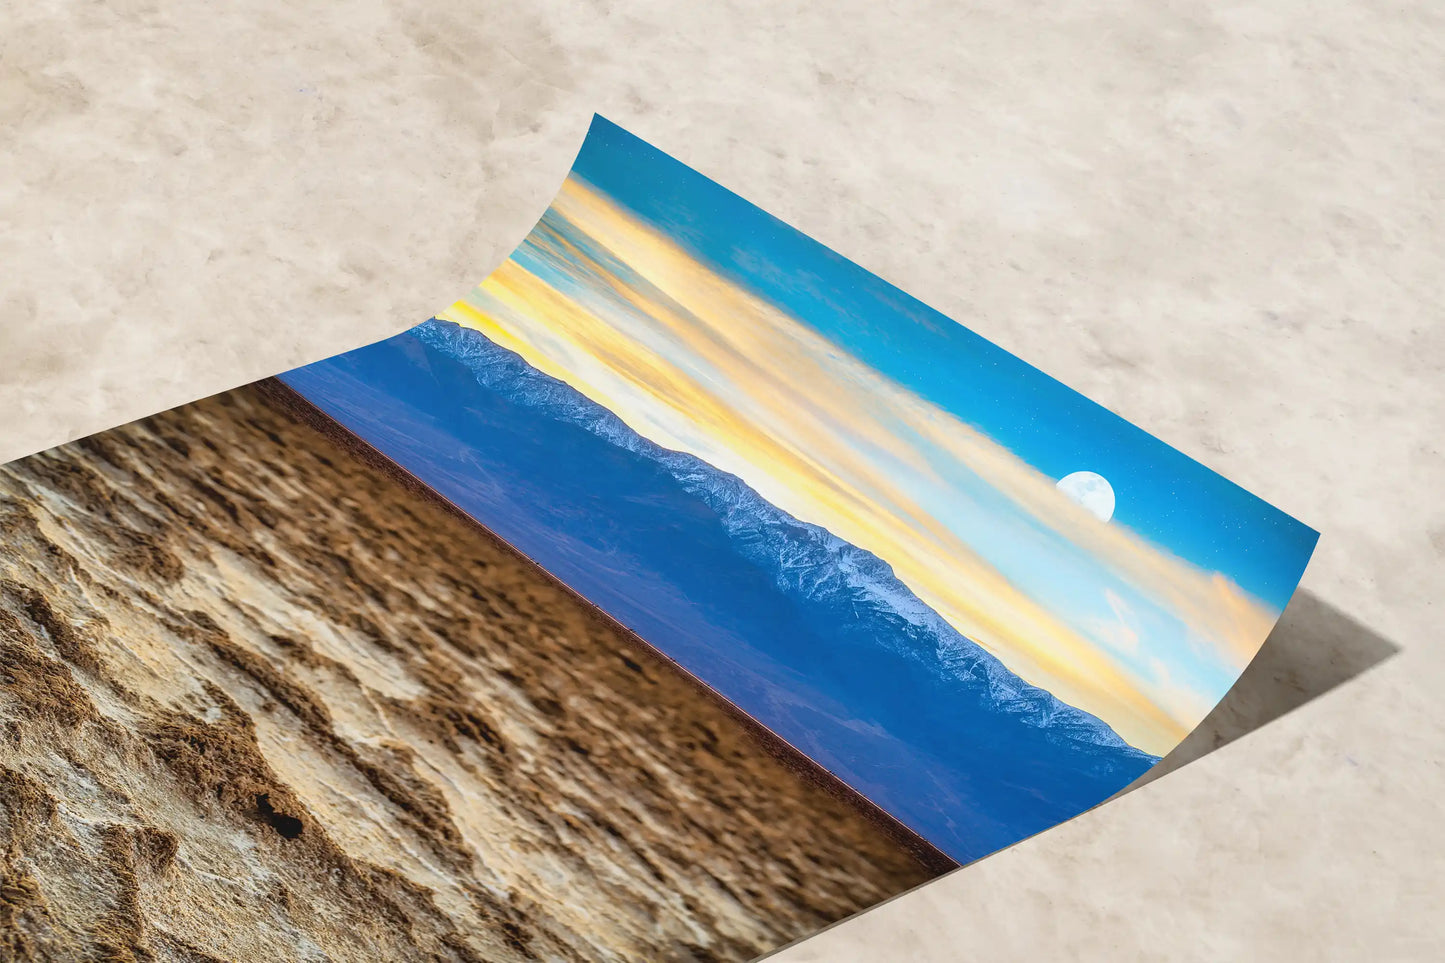 A paper print curving to reveal Death Valley's Badwater Basin under a sunset sky, captured in vivid colors and fine details.